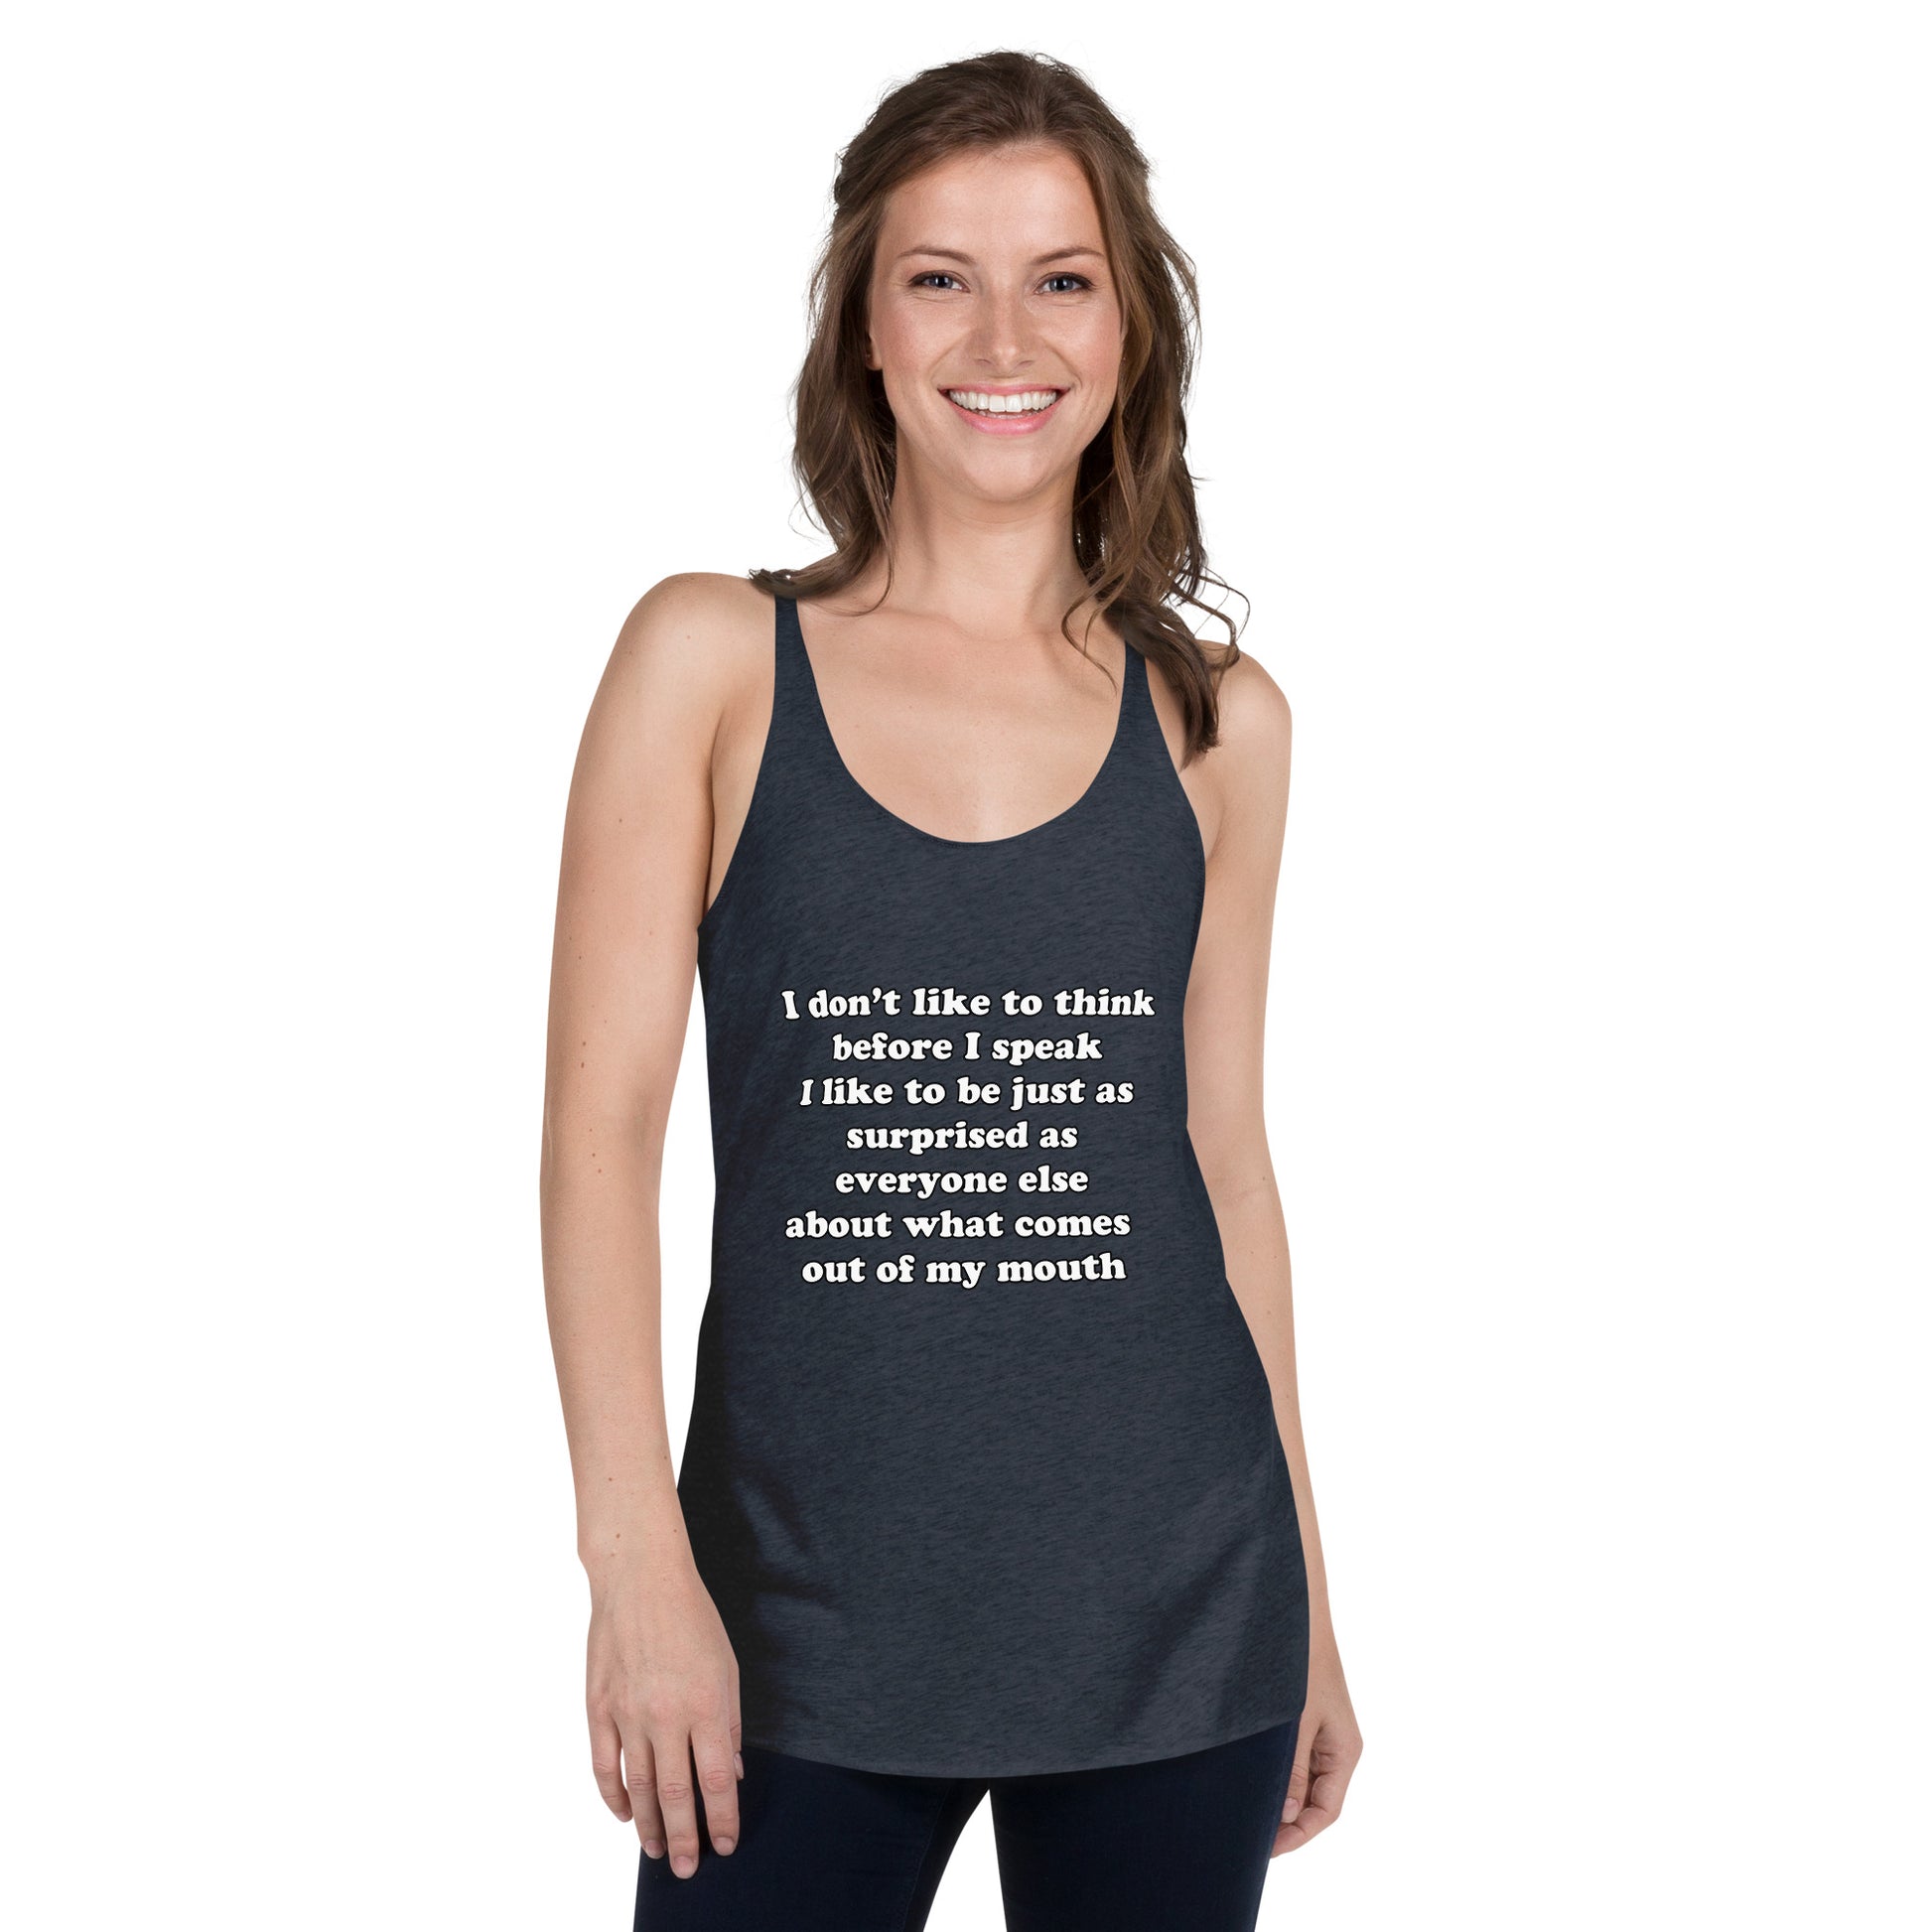 Woman with navy blue tank top with text “I don't think before I speak Just as serprised as everyone about what comes out of my mouth"